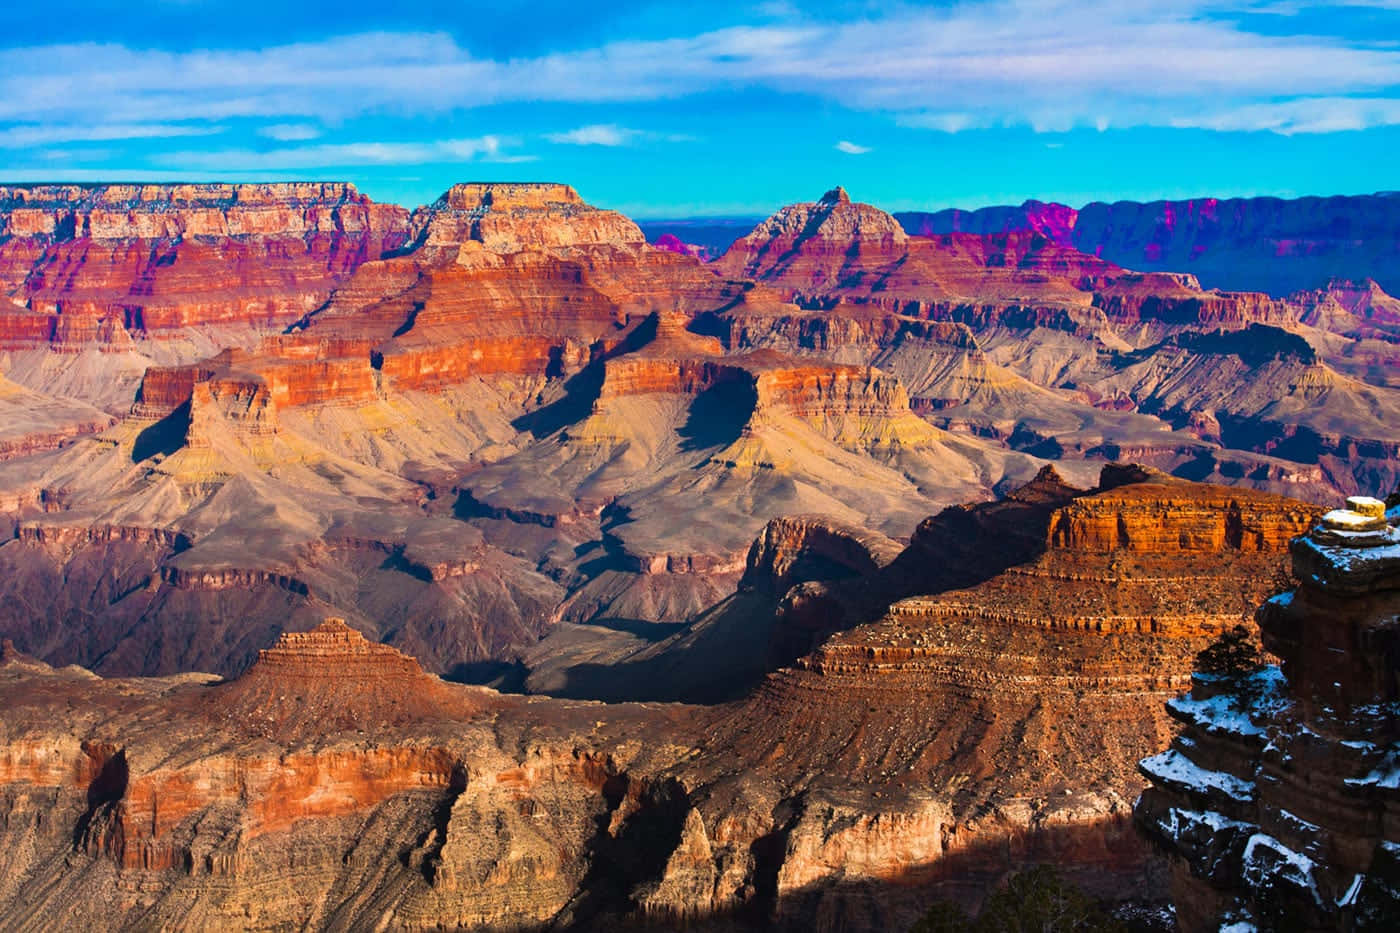 The Grand Canyon's majestic, towering rocks shine in an orange and pink sunset.